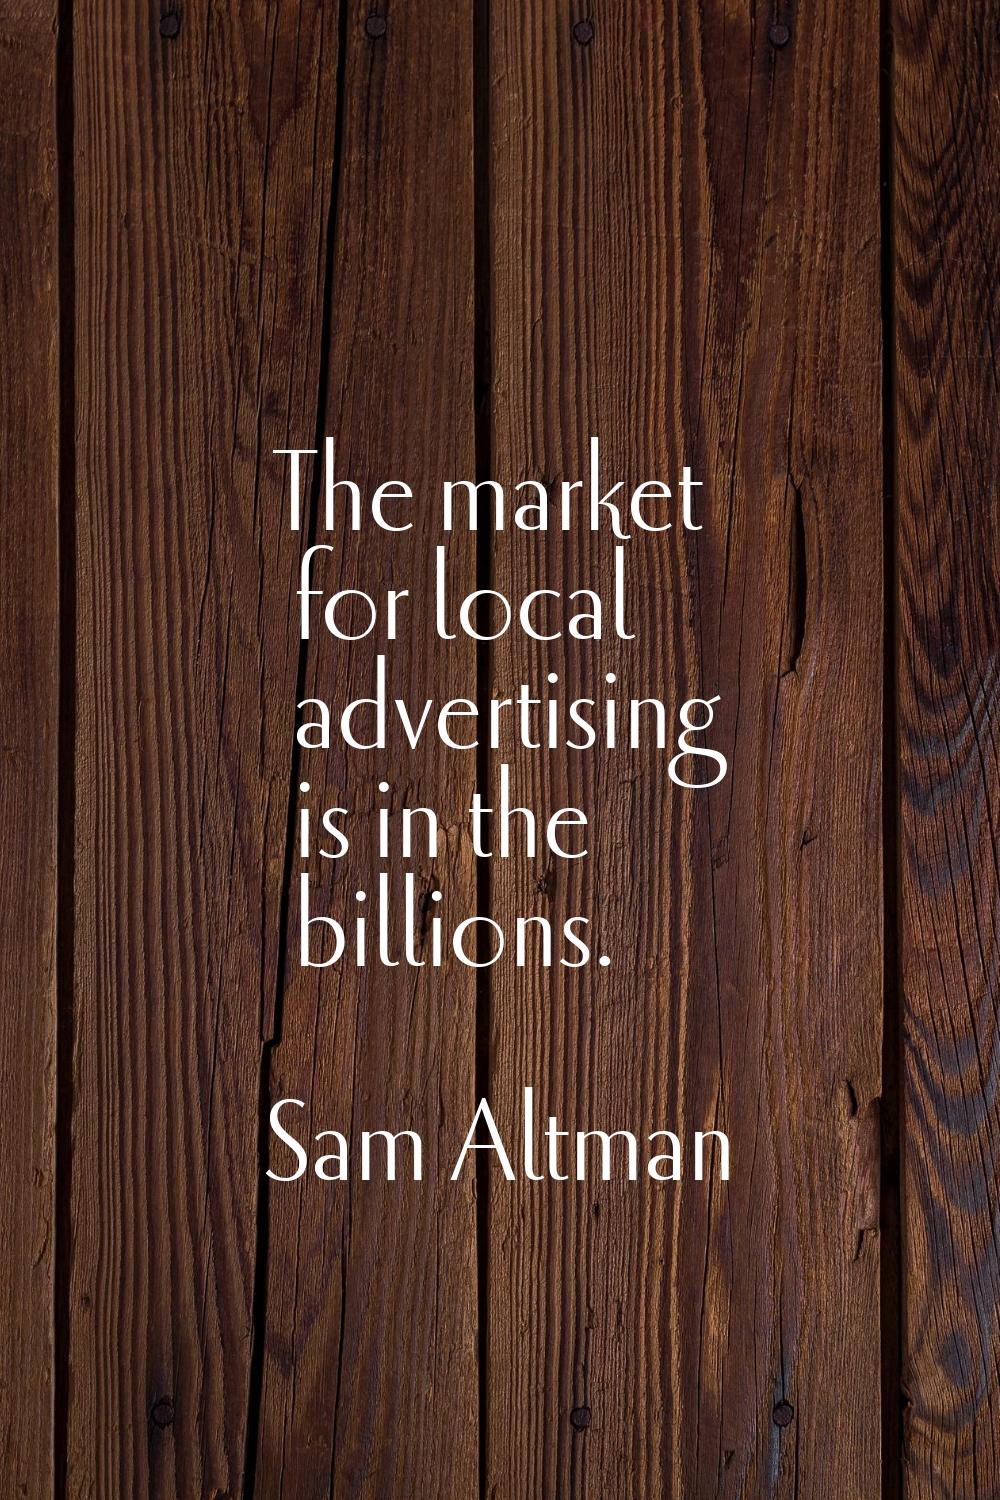 The market for local advertising is in the billions.